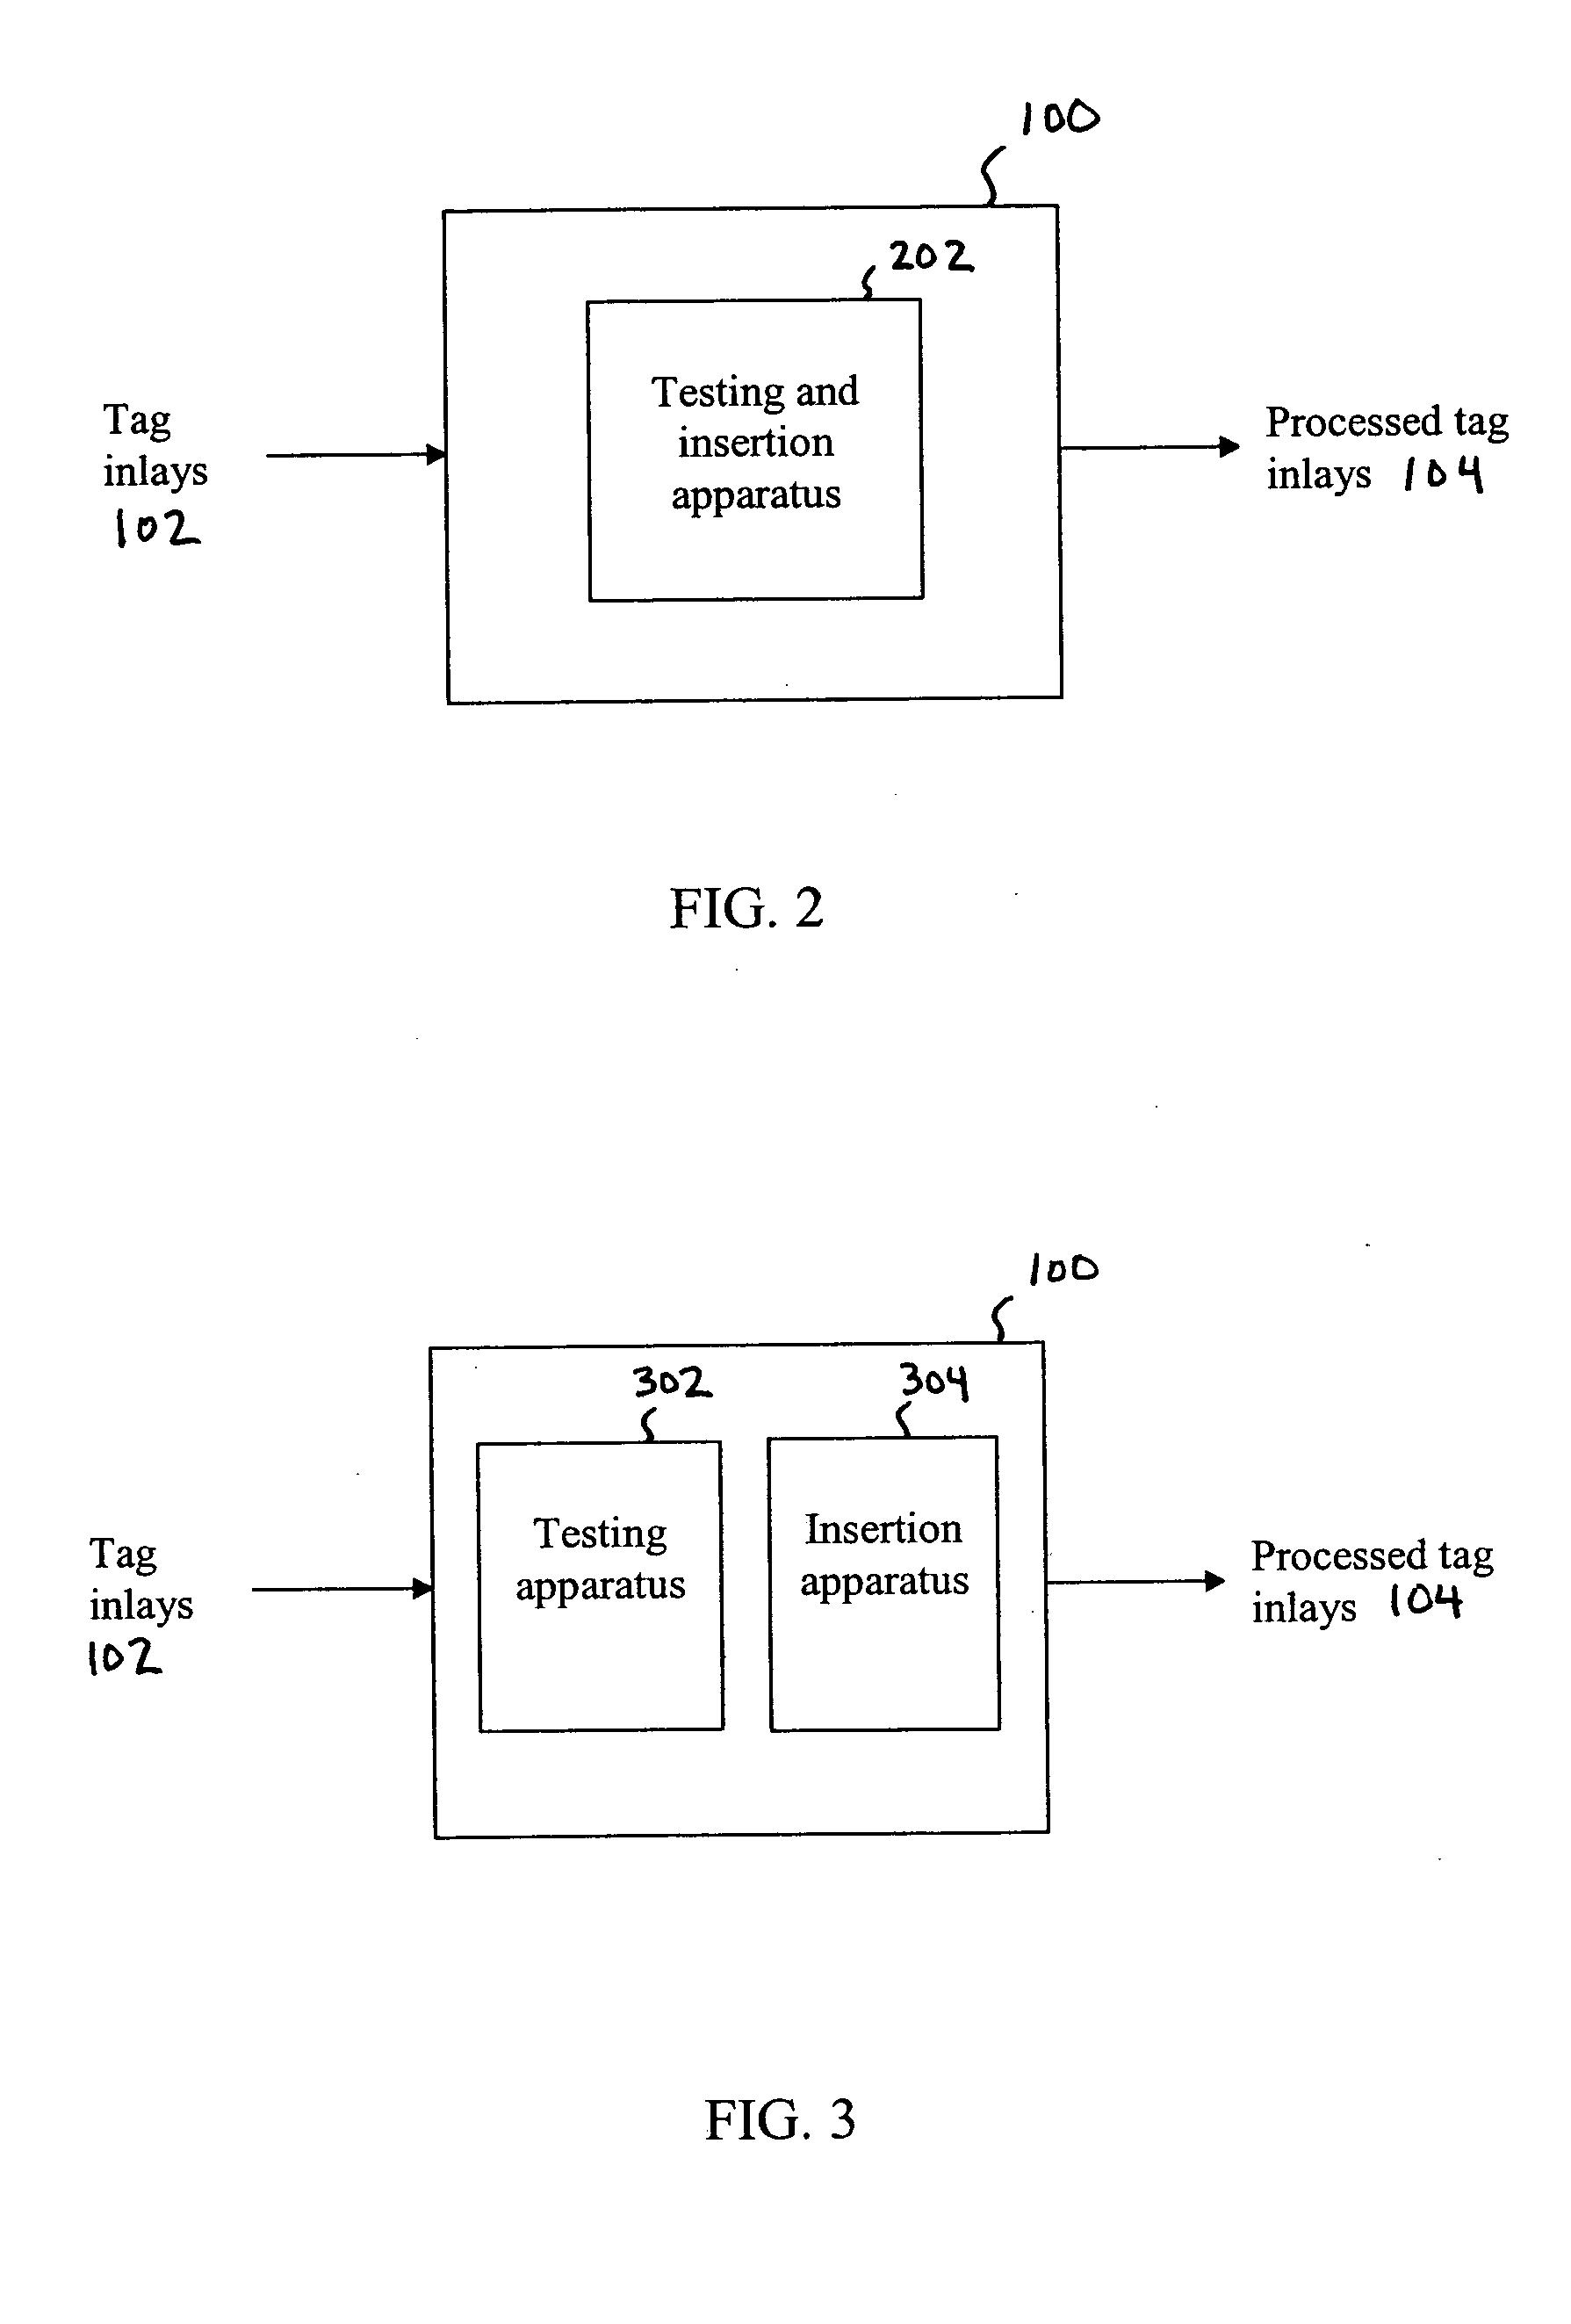 Radio frequency identification tag inlay sortation and assembly